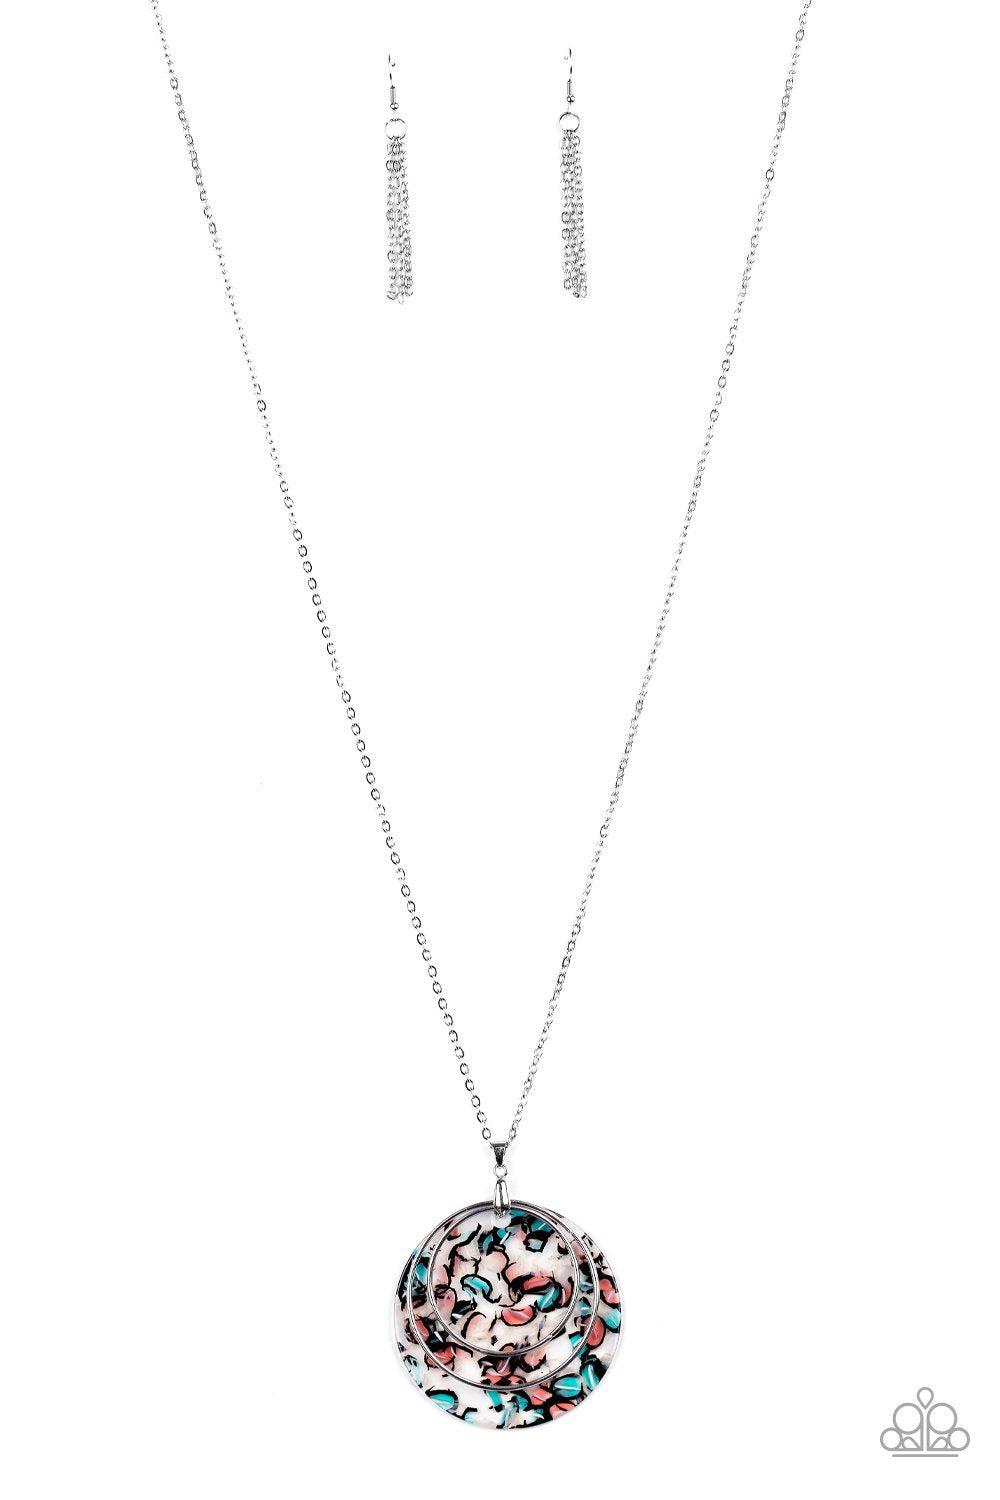 Metro Mosaic Multi-color Blue and Pink Acrylic Pendant Necklace - Paparazzi Accessories-CarasShop.com - $5 Jewelry by Cara Jewels